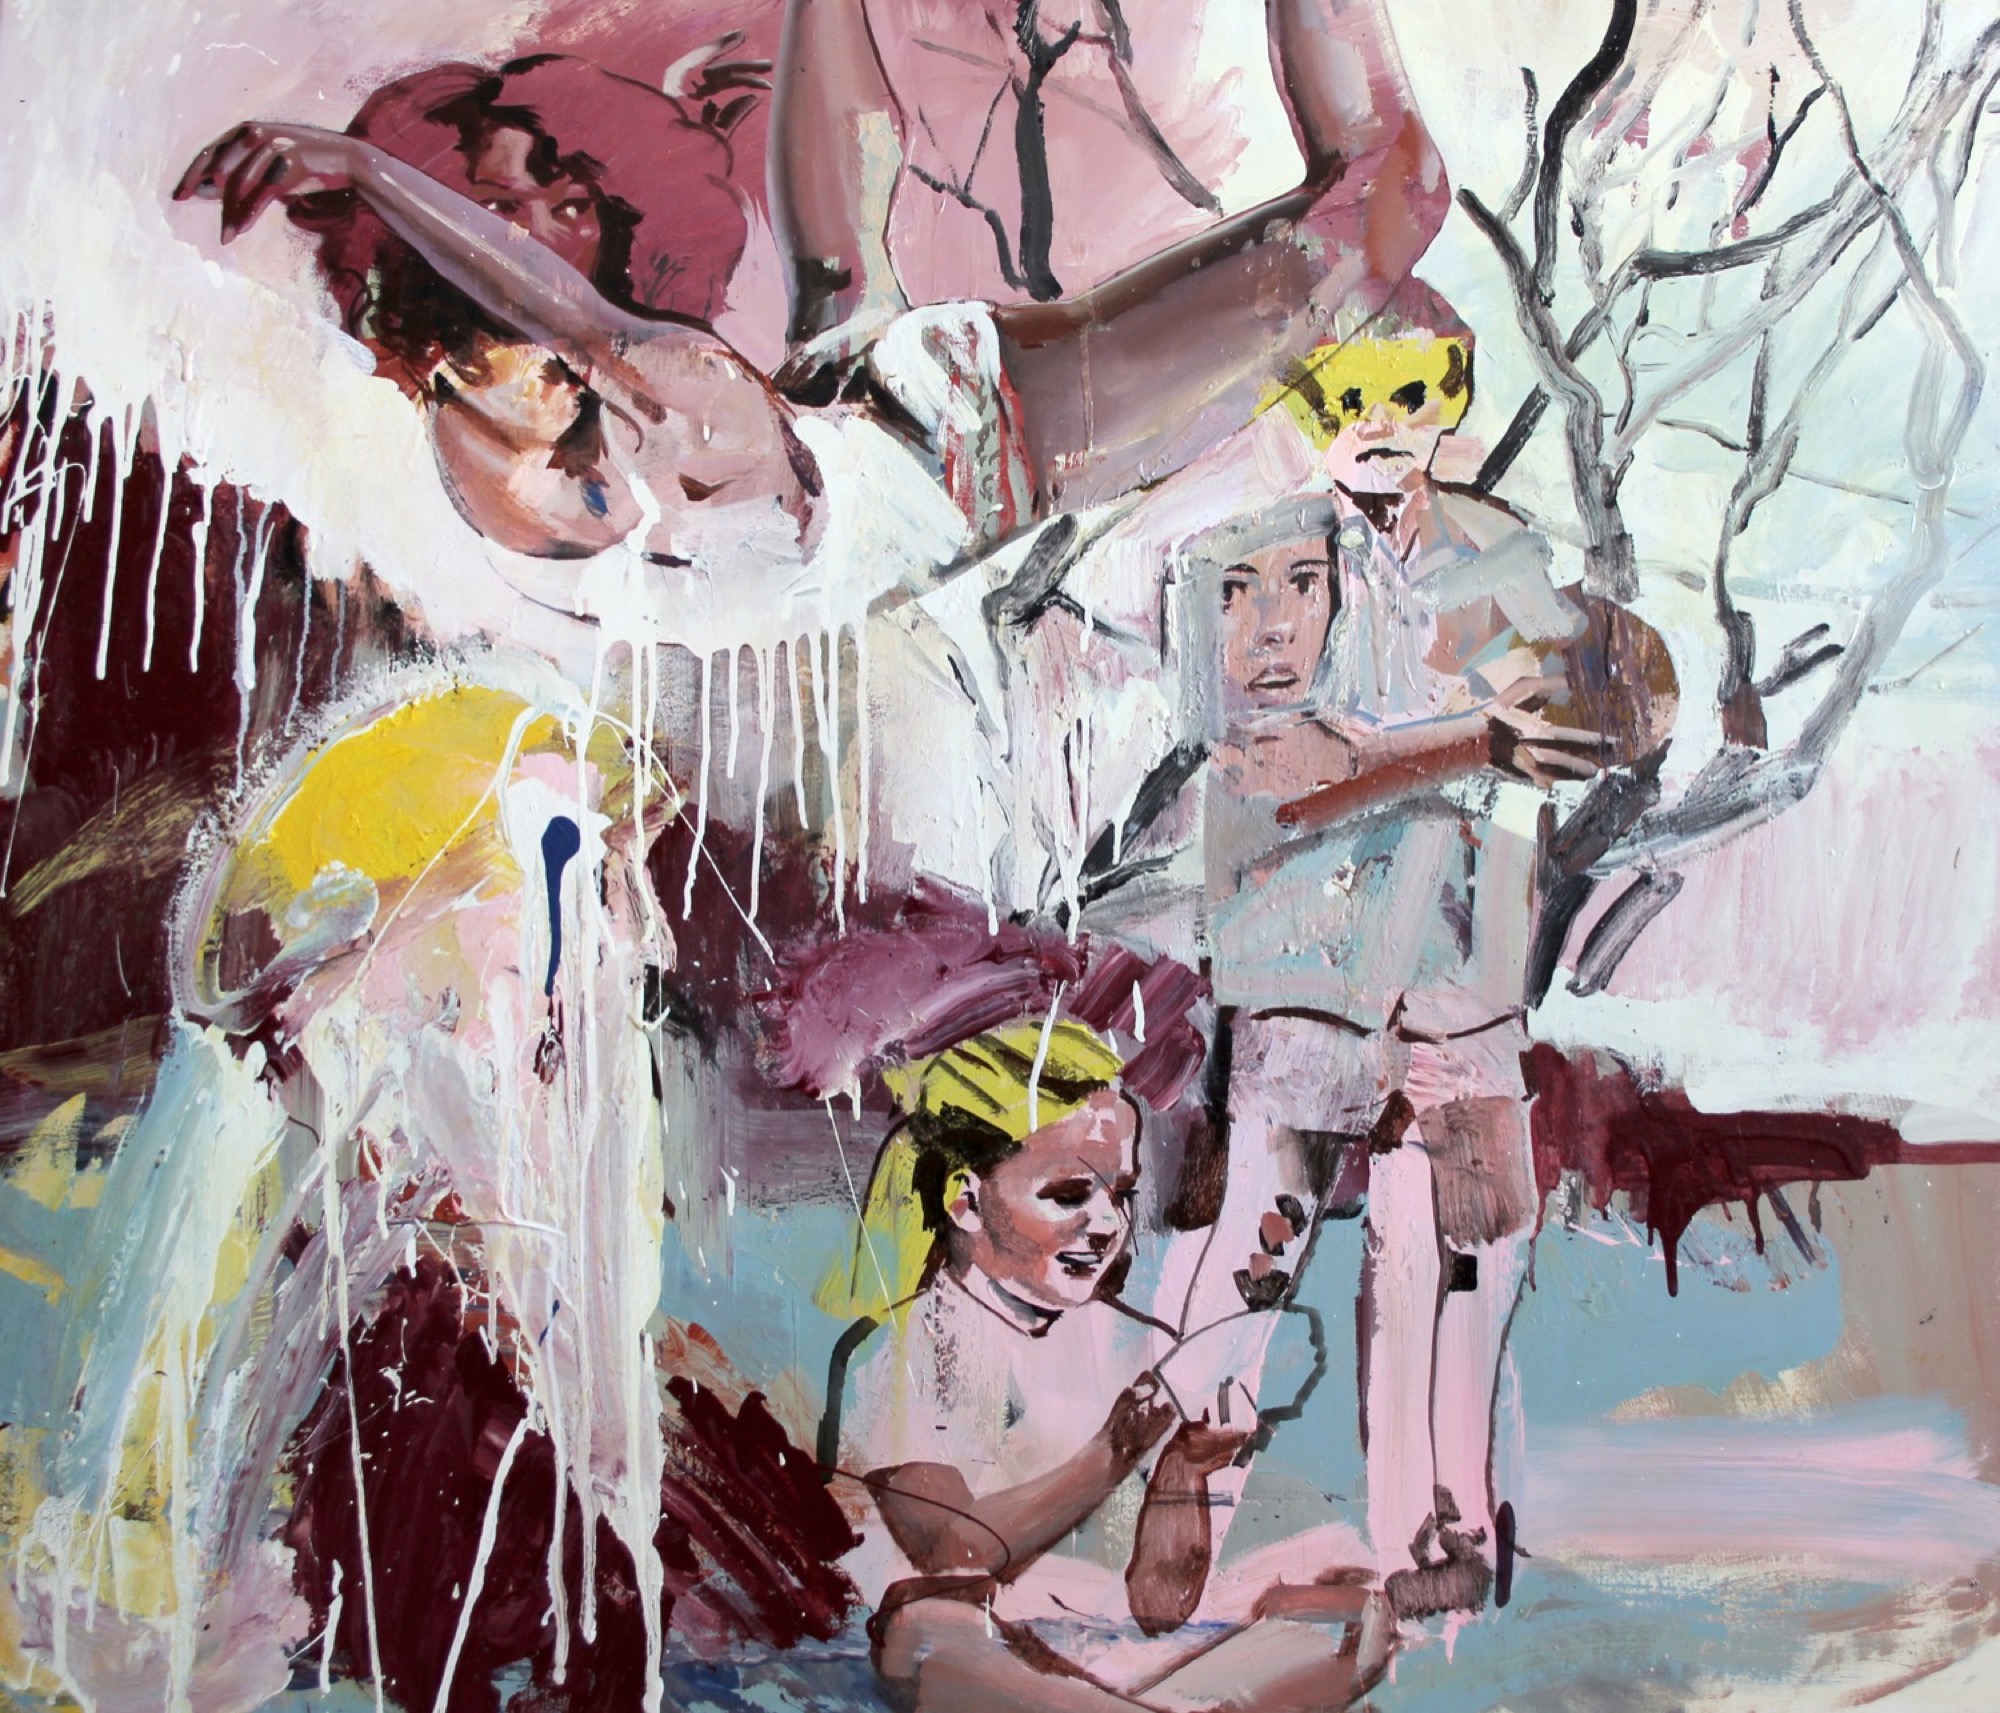 Sophia Whitney Hewson, <em>2020-2021</em>, 2021, oil on canvas, 120 x 125 cm, MARS Gallery, Melbourne. Courtesy of the artist and MARS Gallery